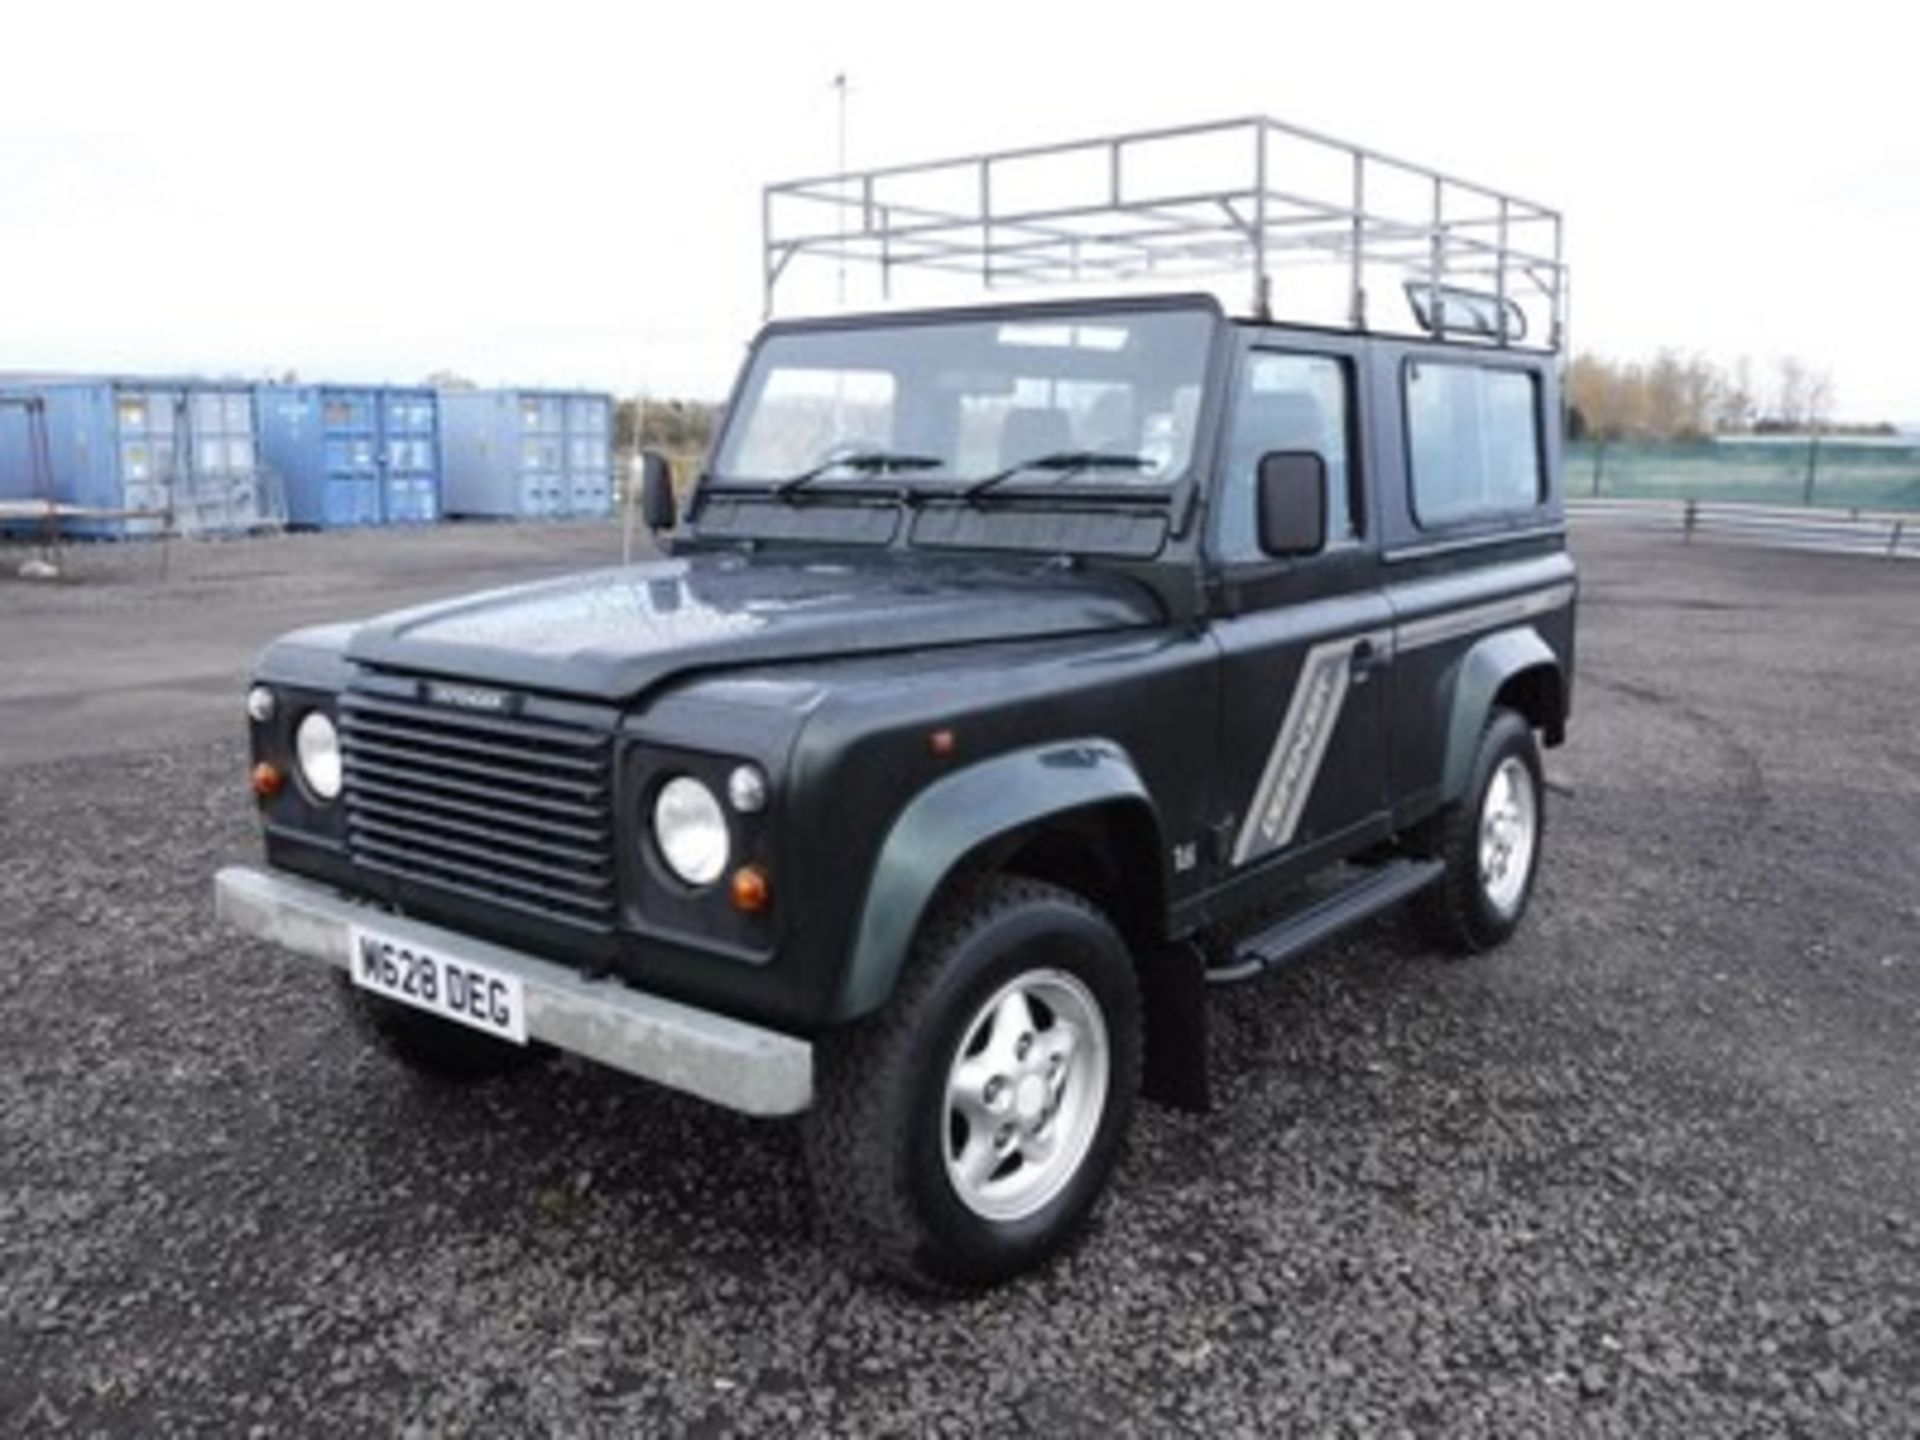 LAND ROVER 90 DEFENDER COUNTY SW TDI - 2495cc - Image 4 of 16